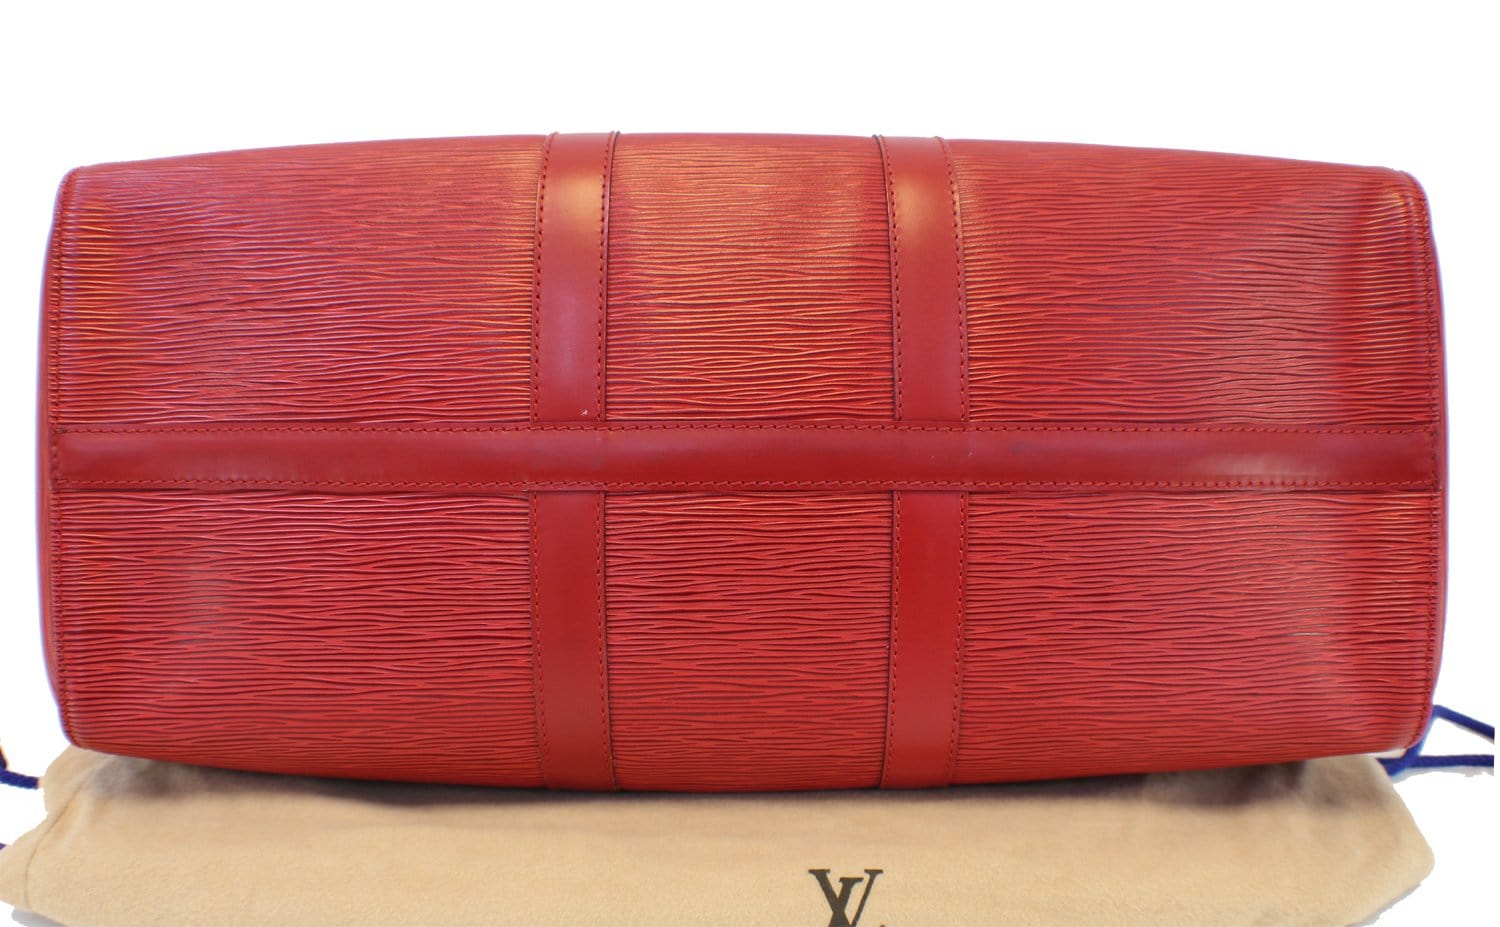 Authentic Louis Vuitton Soufflot Epi Red Leather With 